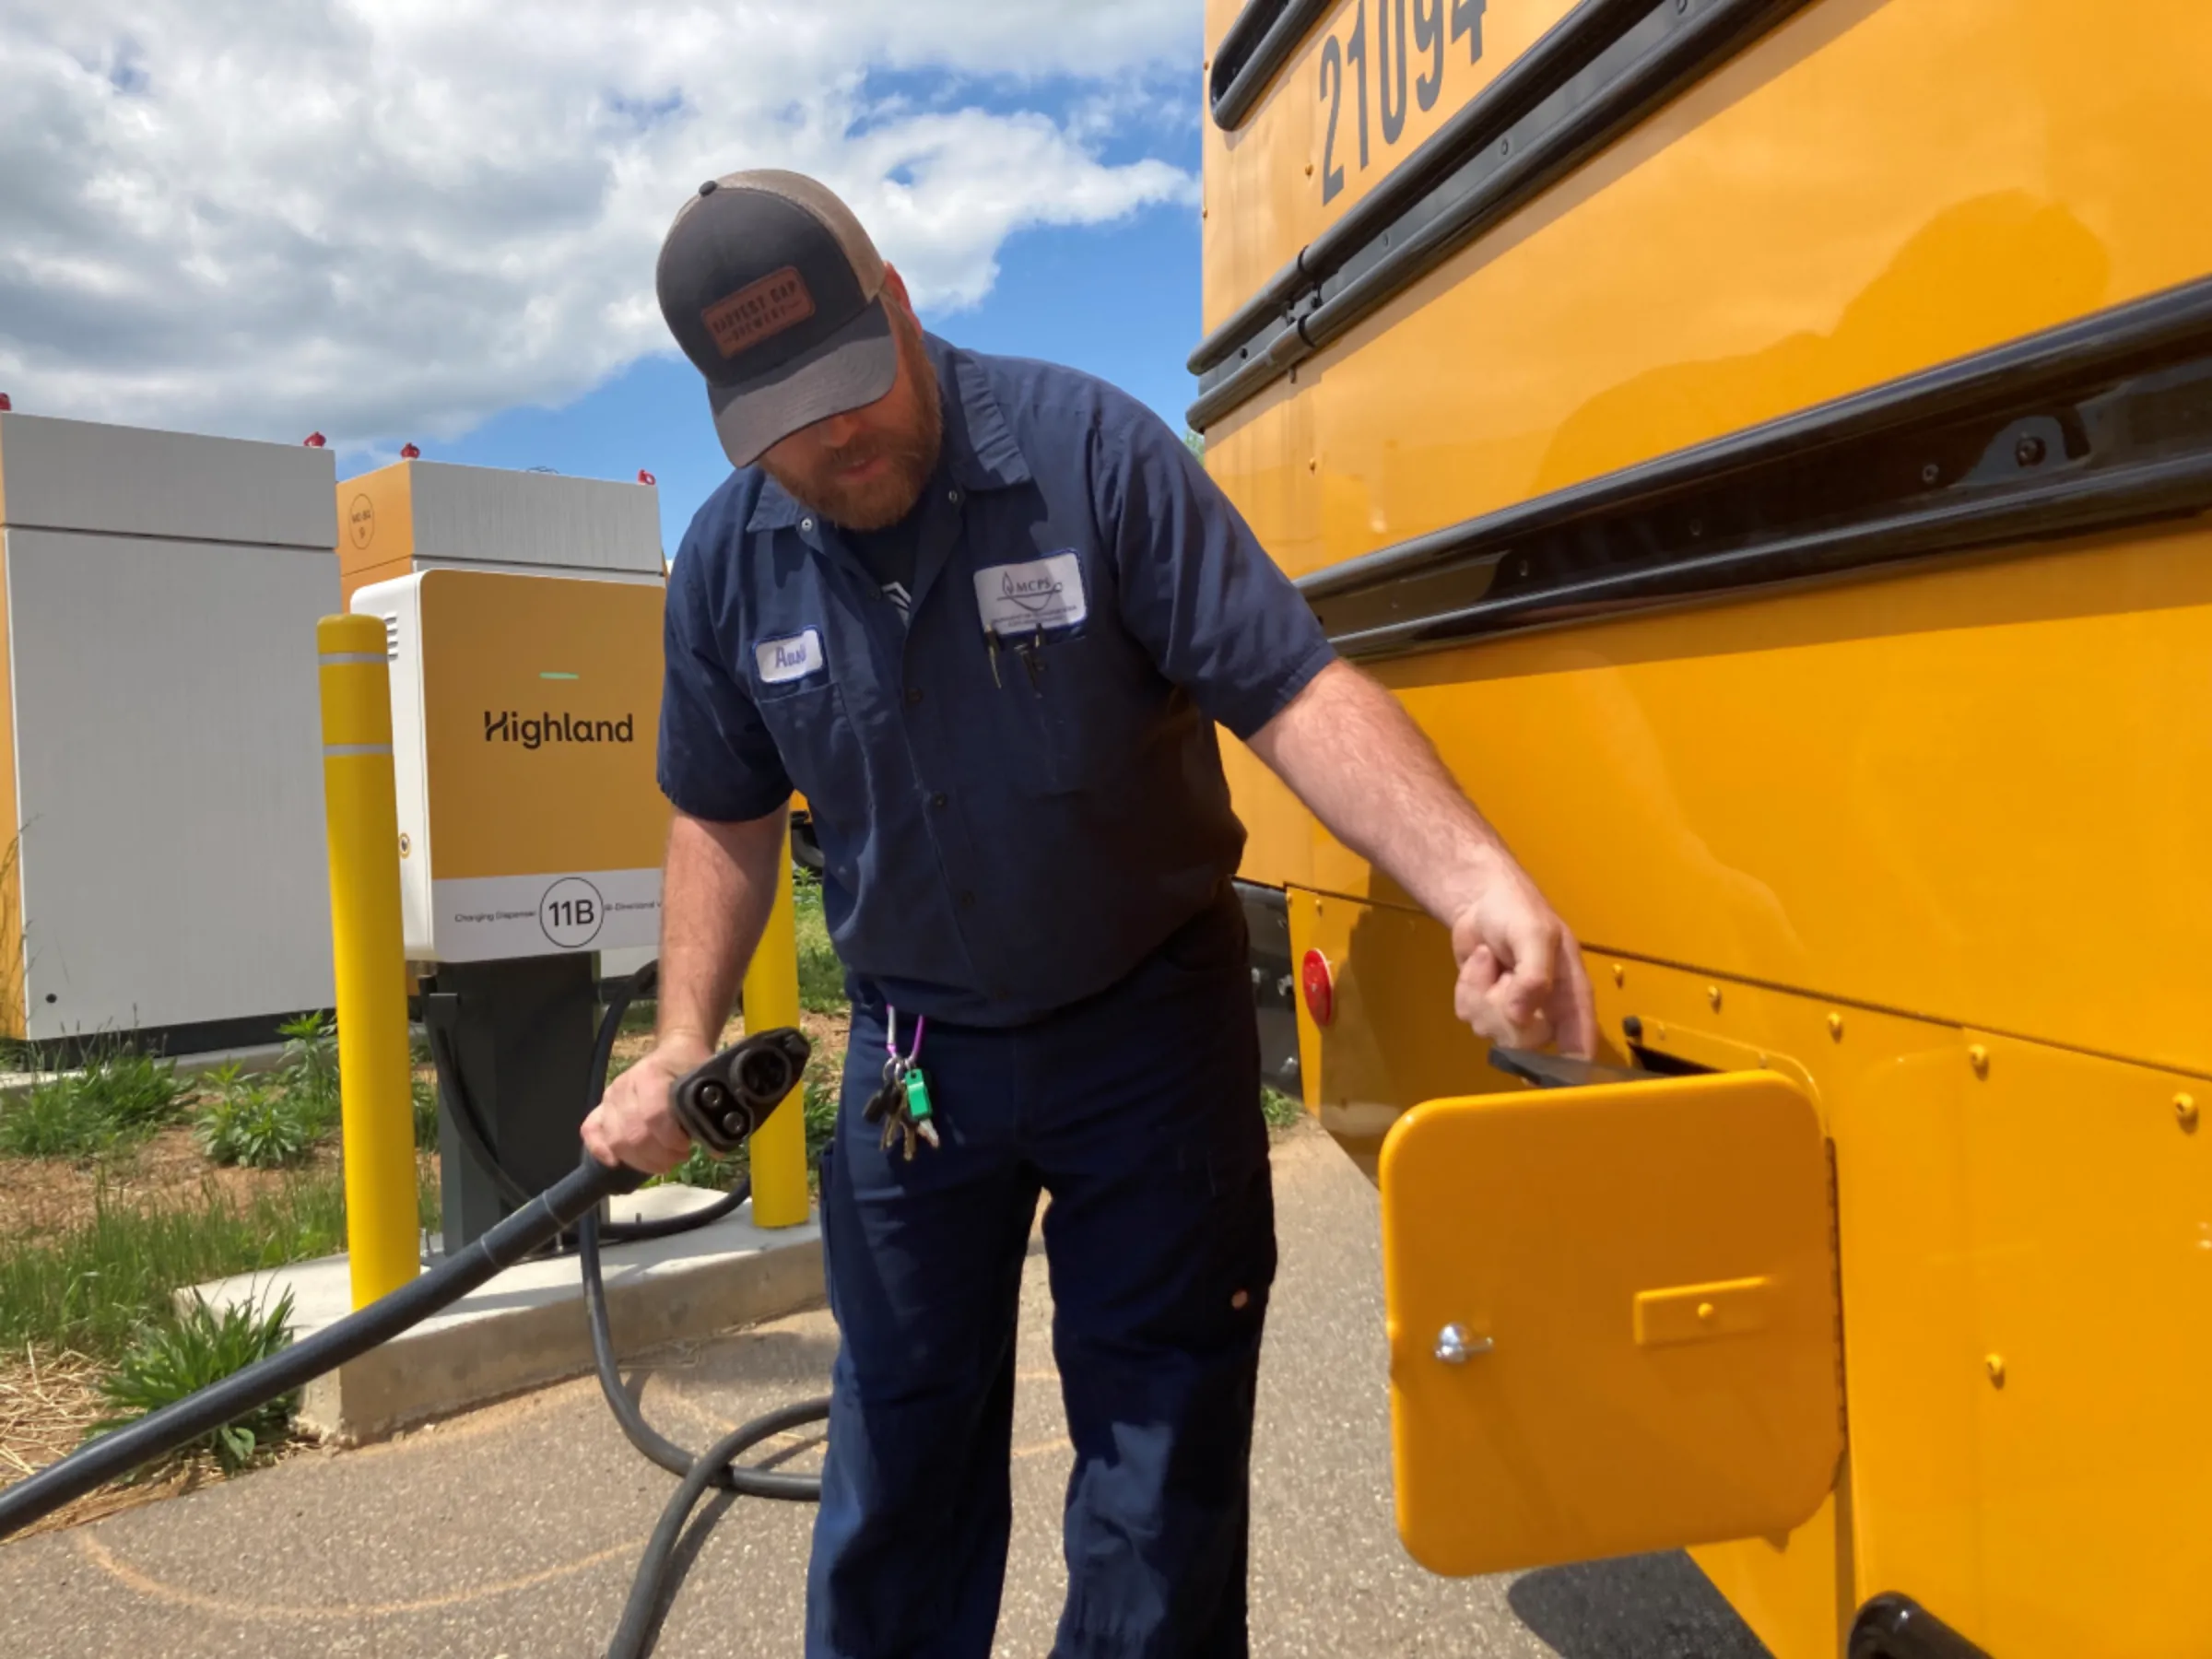 Michael C. Austin, lead technician with the Montgomery County Public Schools Department of Transportation, plugs in an electric school bus in Rockville, Maryland, in April 2023. Thomson Reuters Foundation/Carey L. Biron